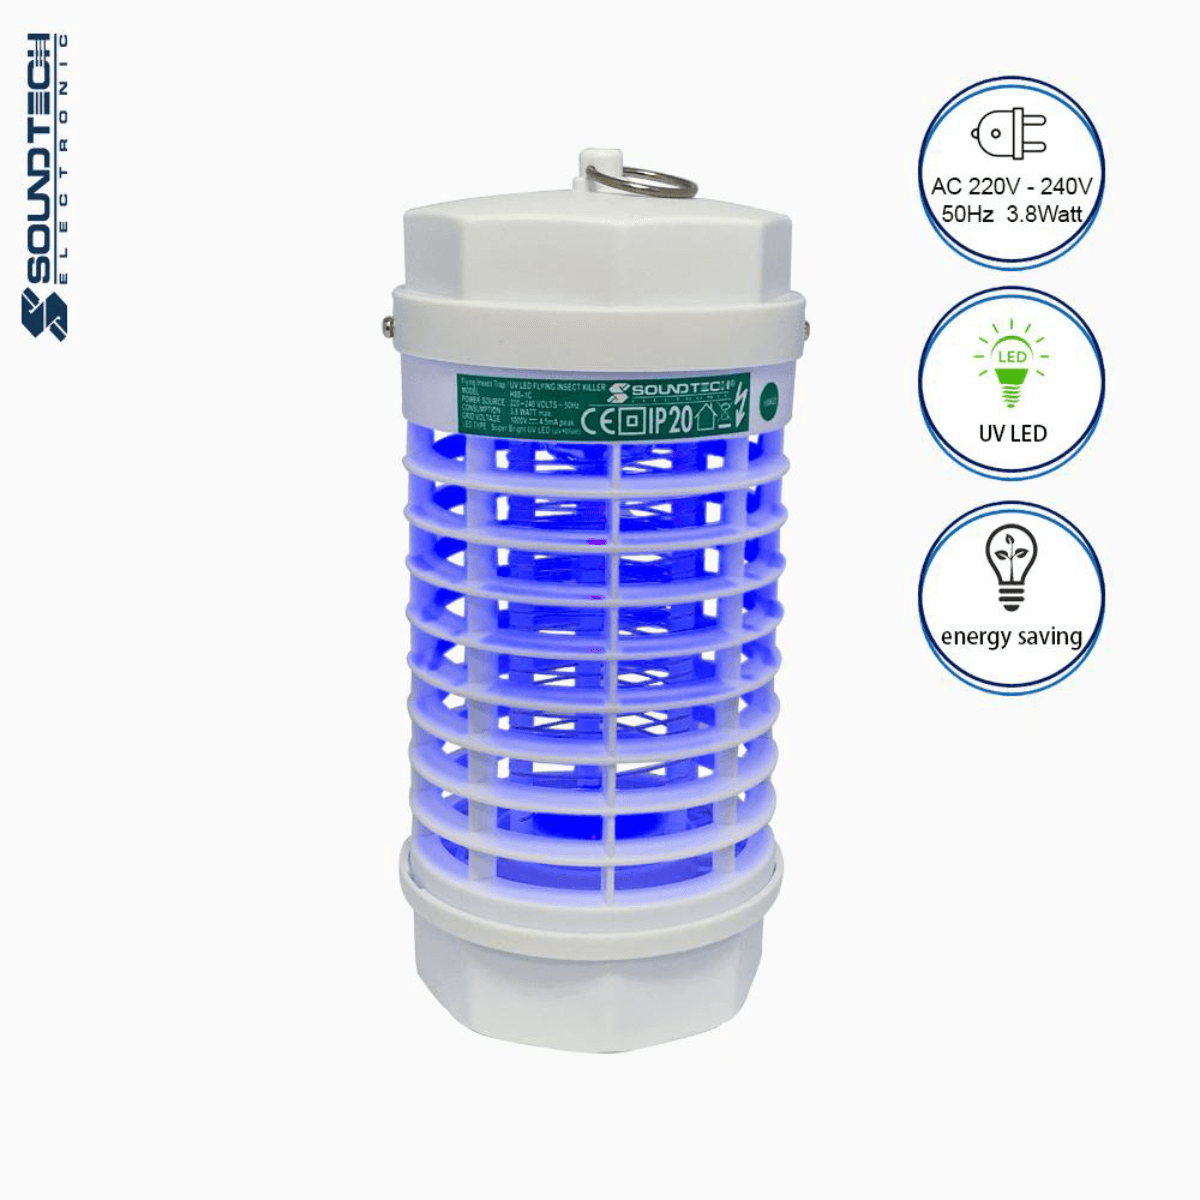 SoundTech Flying Insect Trap